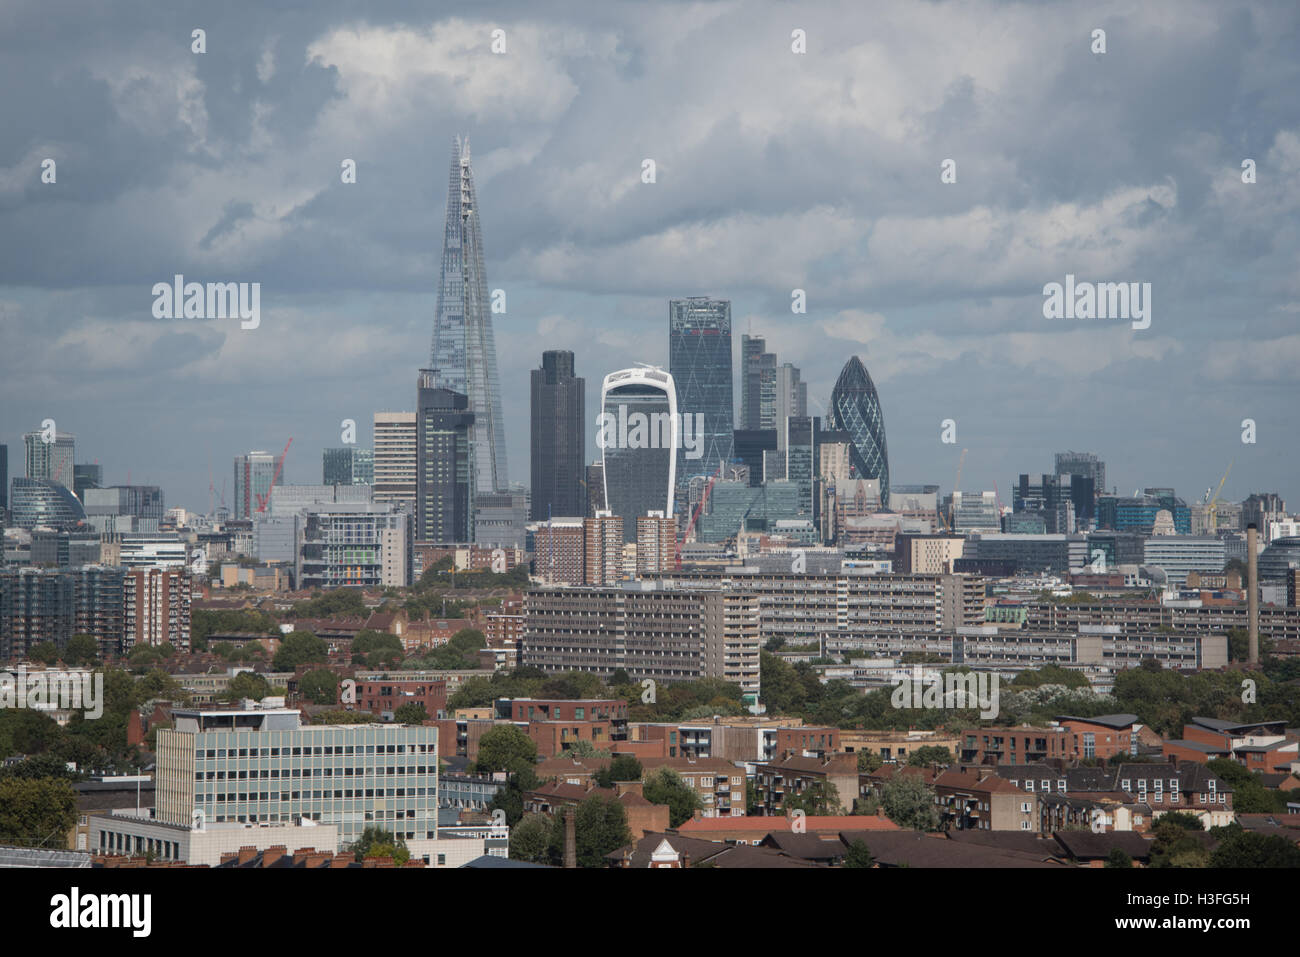 A view of the financial district in the City of London Stock Photo